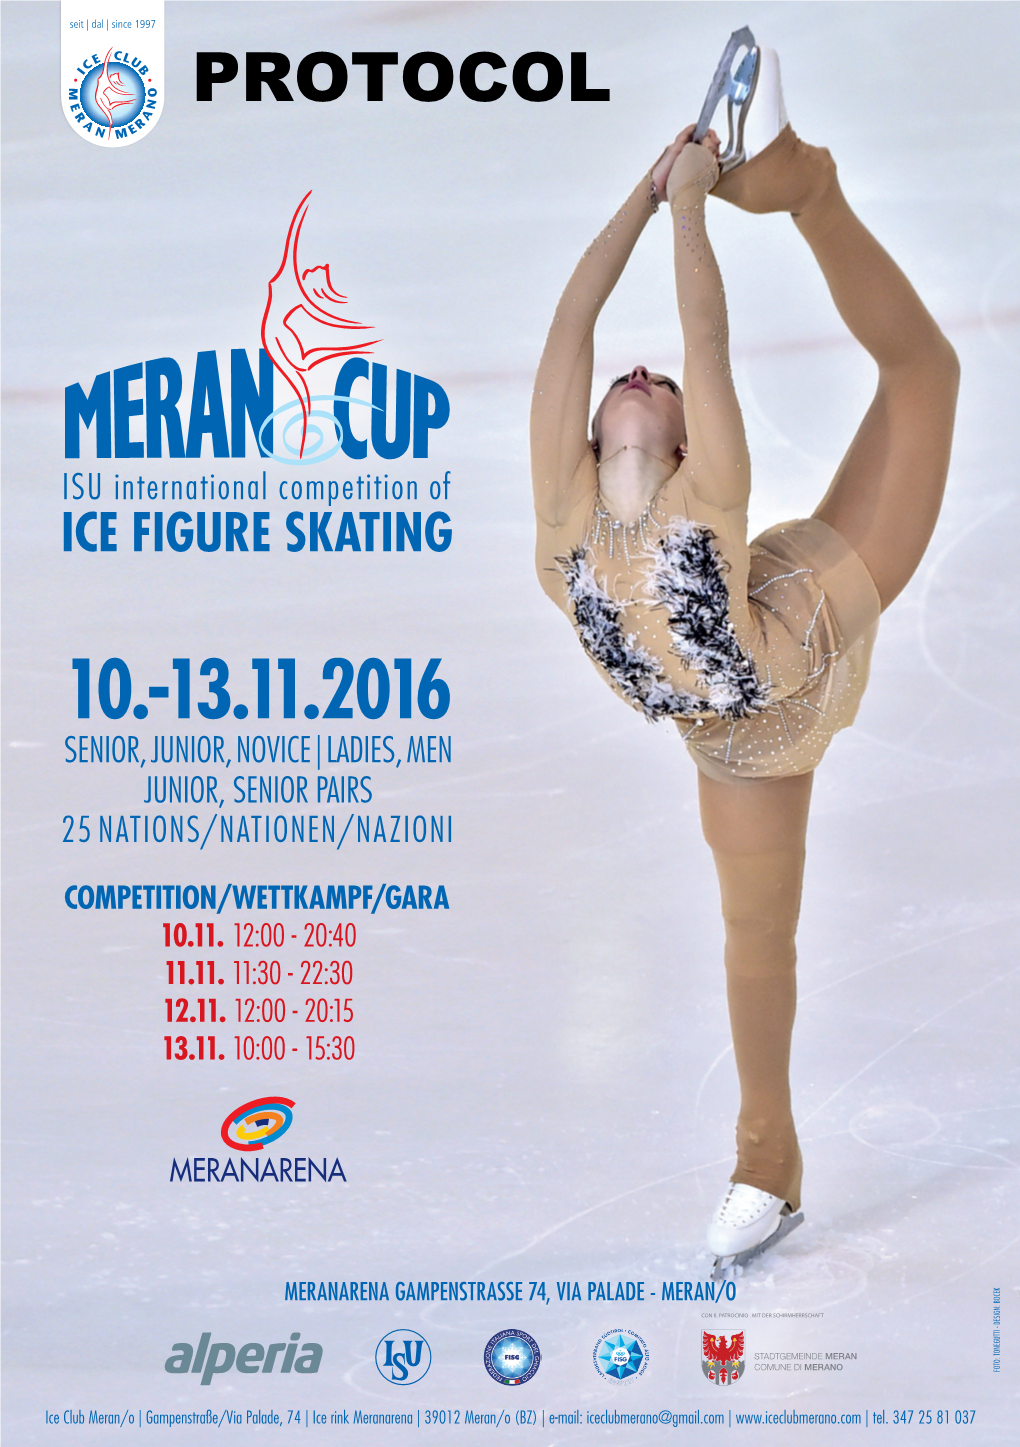 PROTOCOL the Italian Federation (FISG) and the Ice Club Merano Are Honoured to Welcome You As Our Guests to the 19Th Merano Cup in Merano Southtyrol Italy